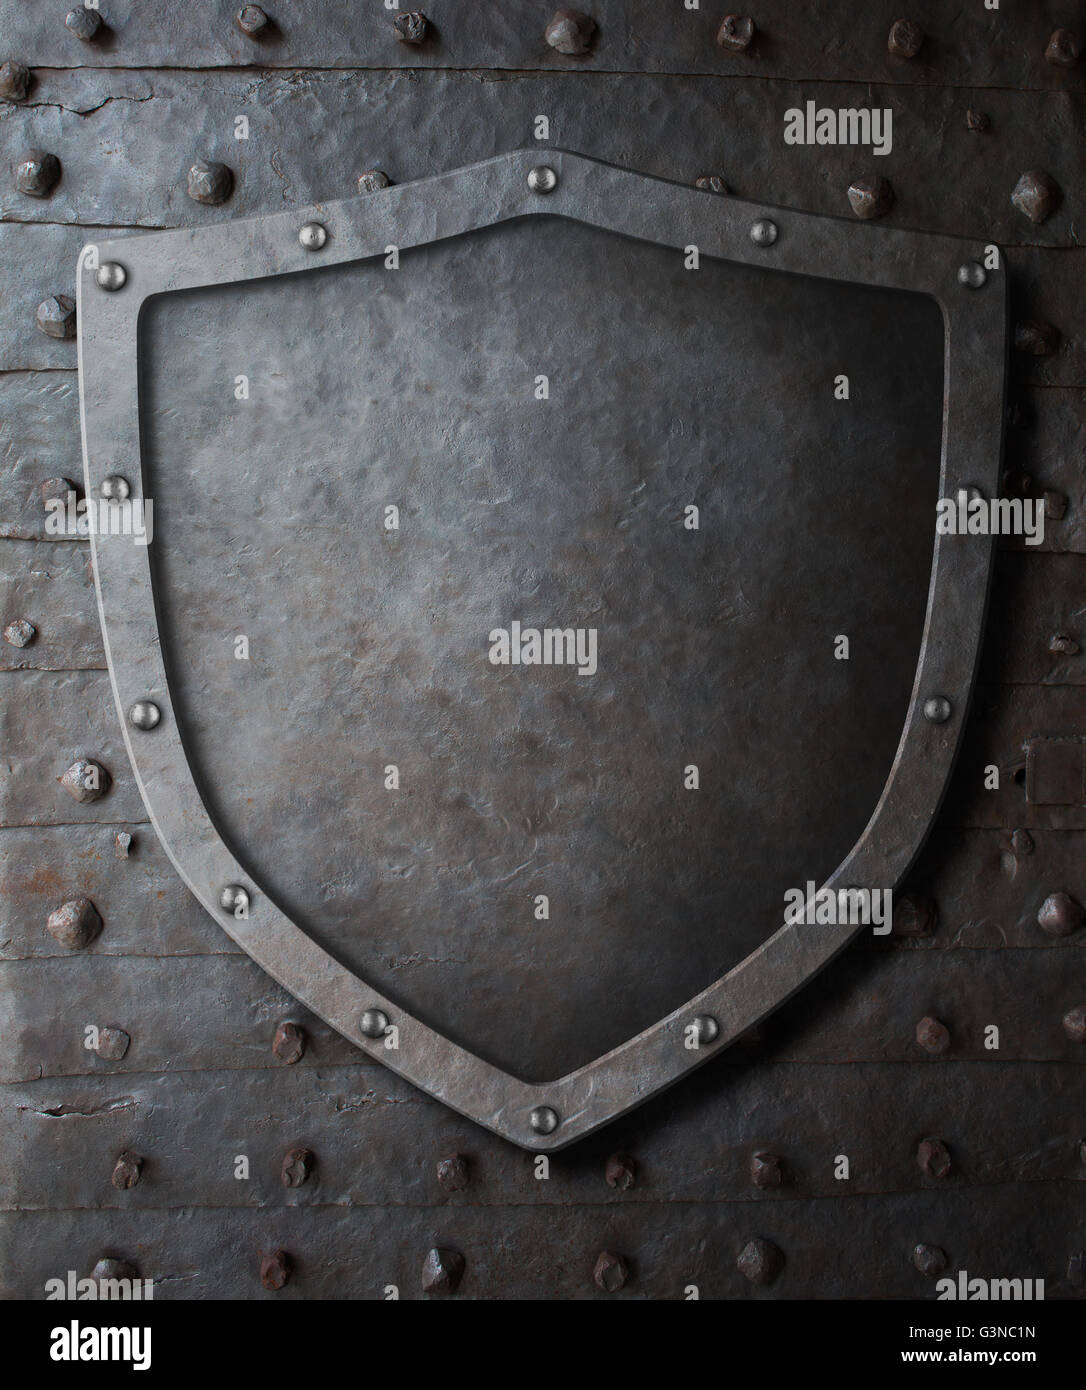 old medieval coat of arms shield over metal door background Stock Photo